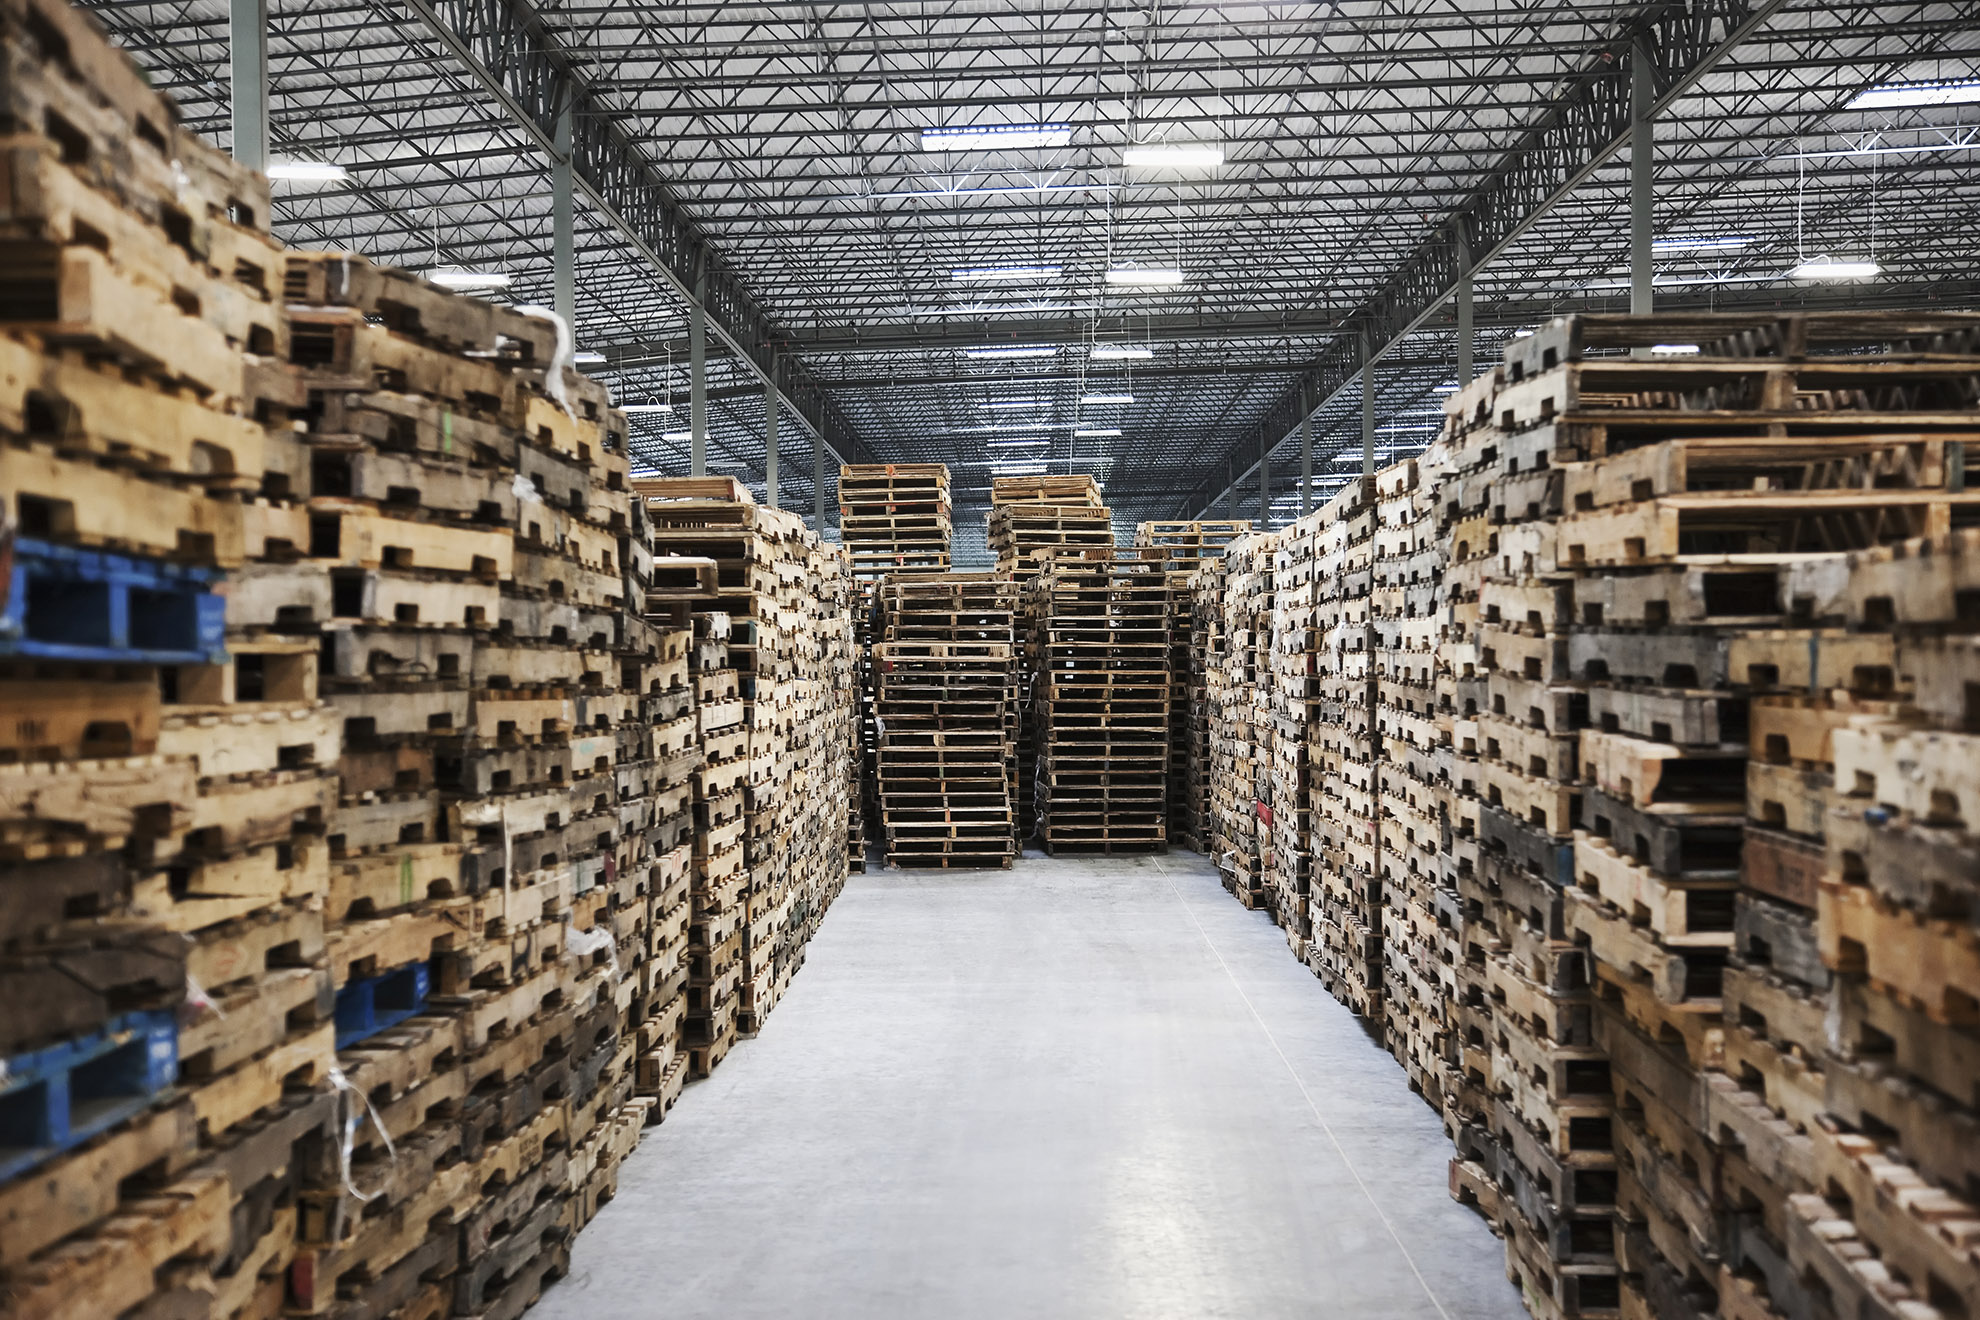 Stacked pallets in warehouse.